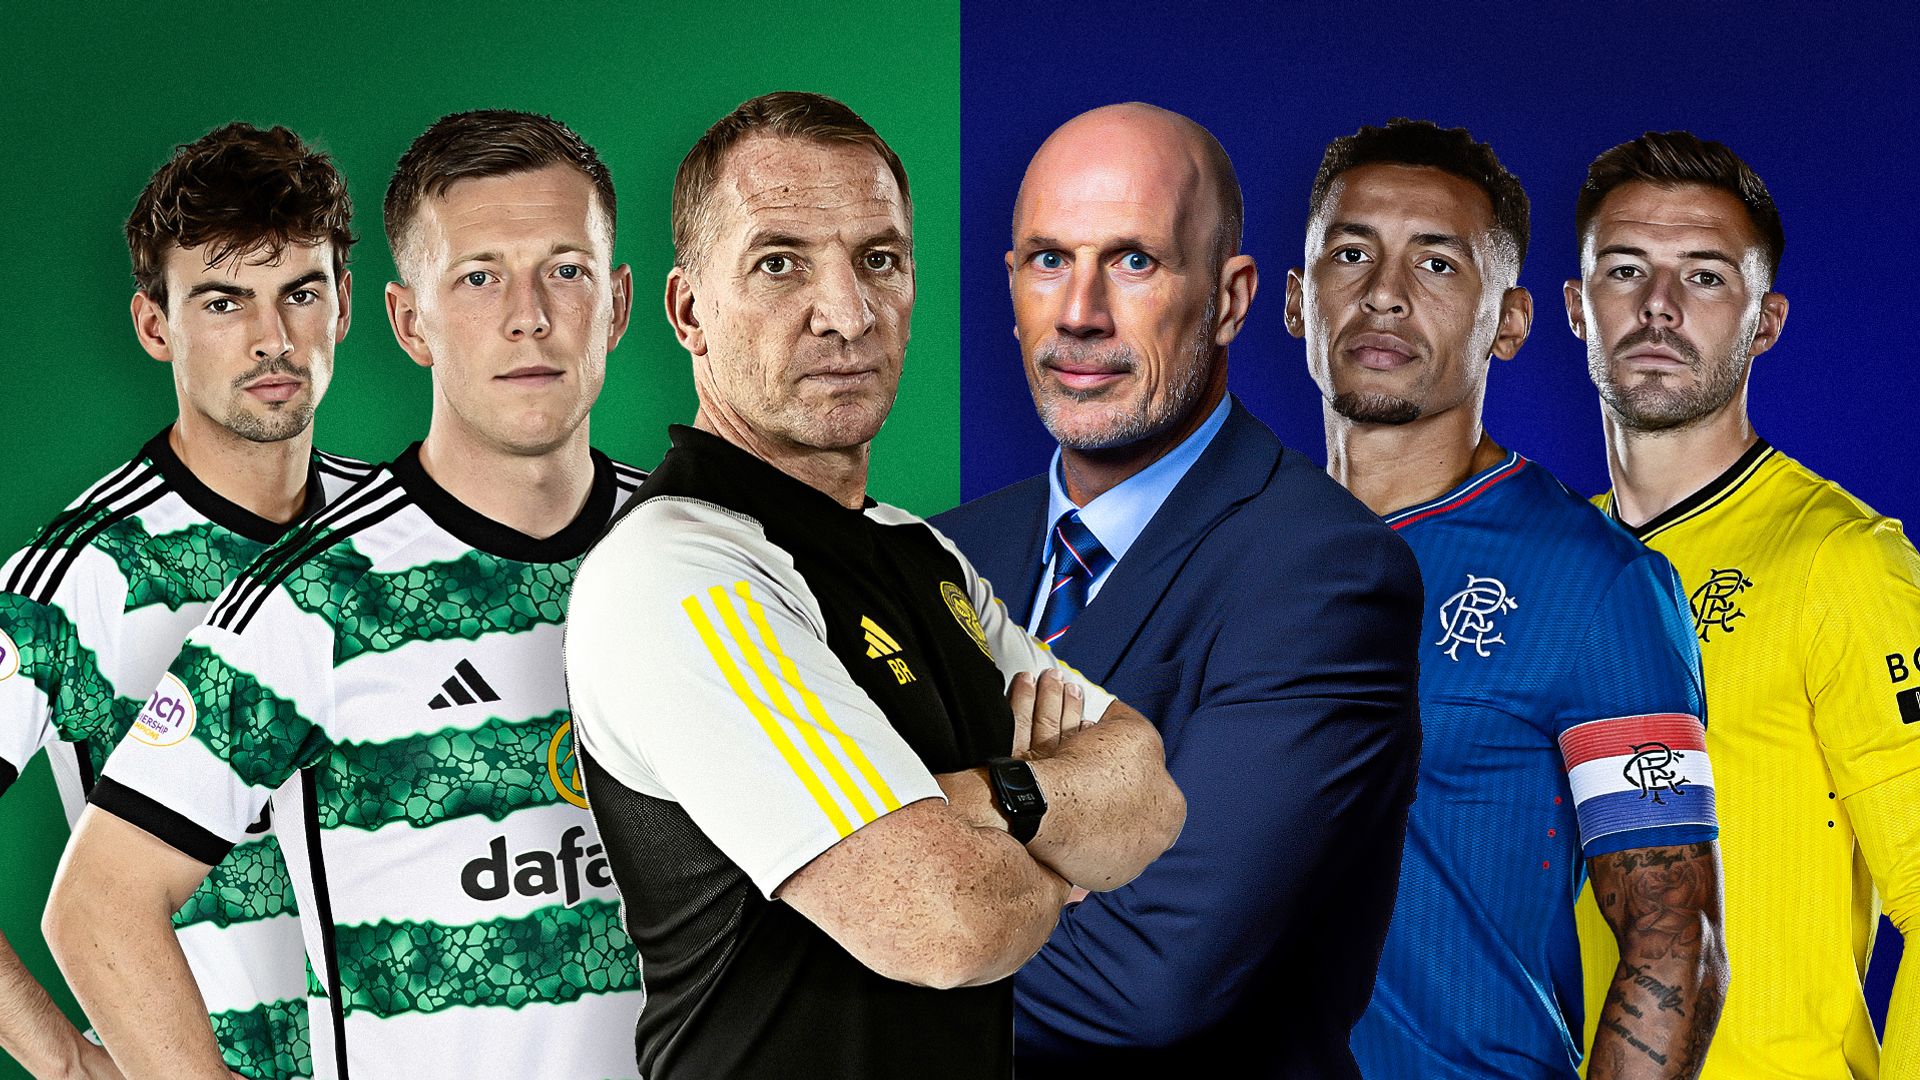 Celtic favourites in Premiership title race? | Any way back for Rangers?